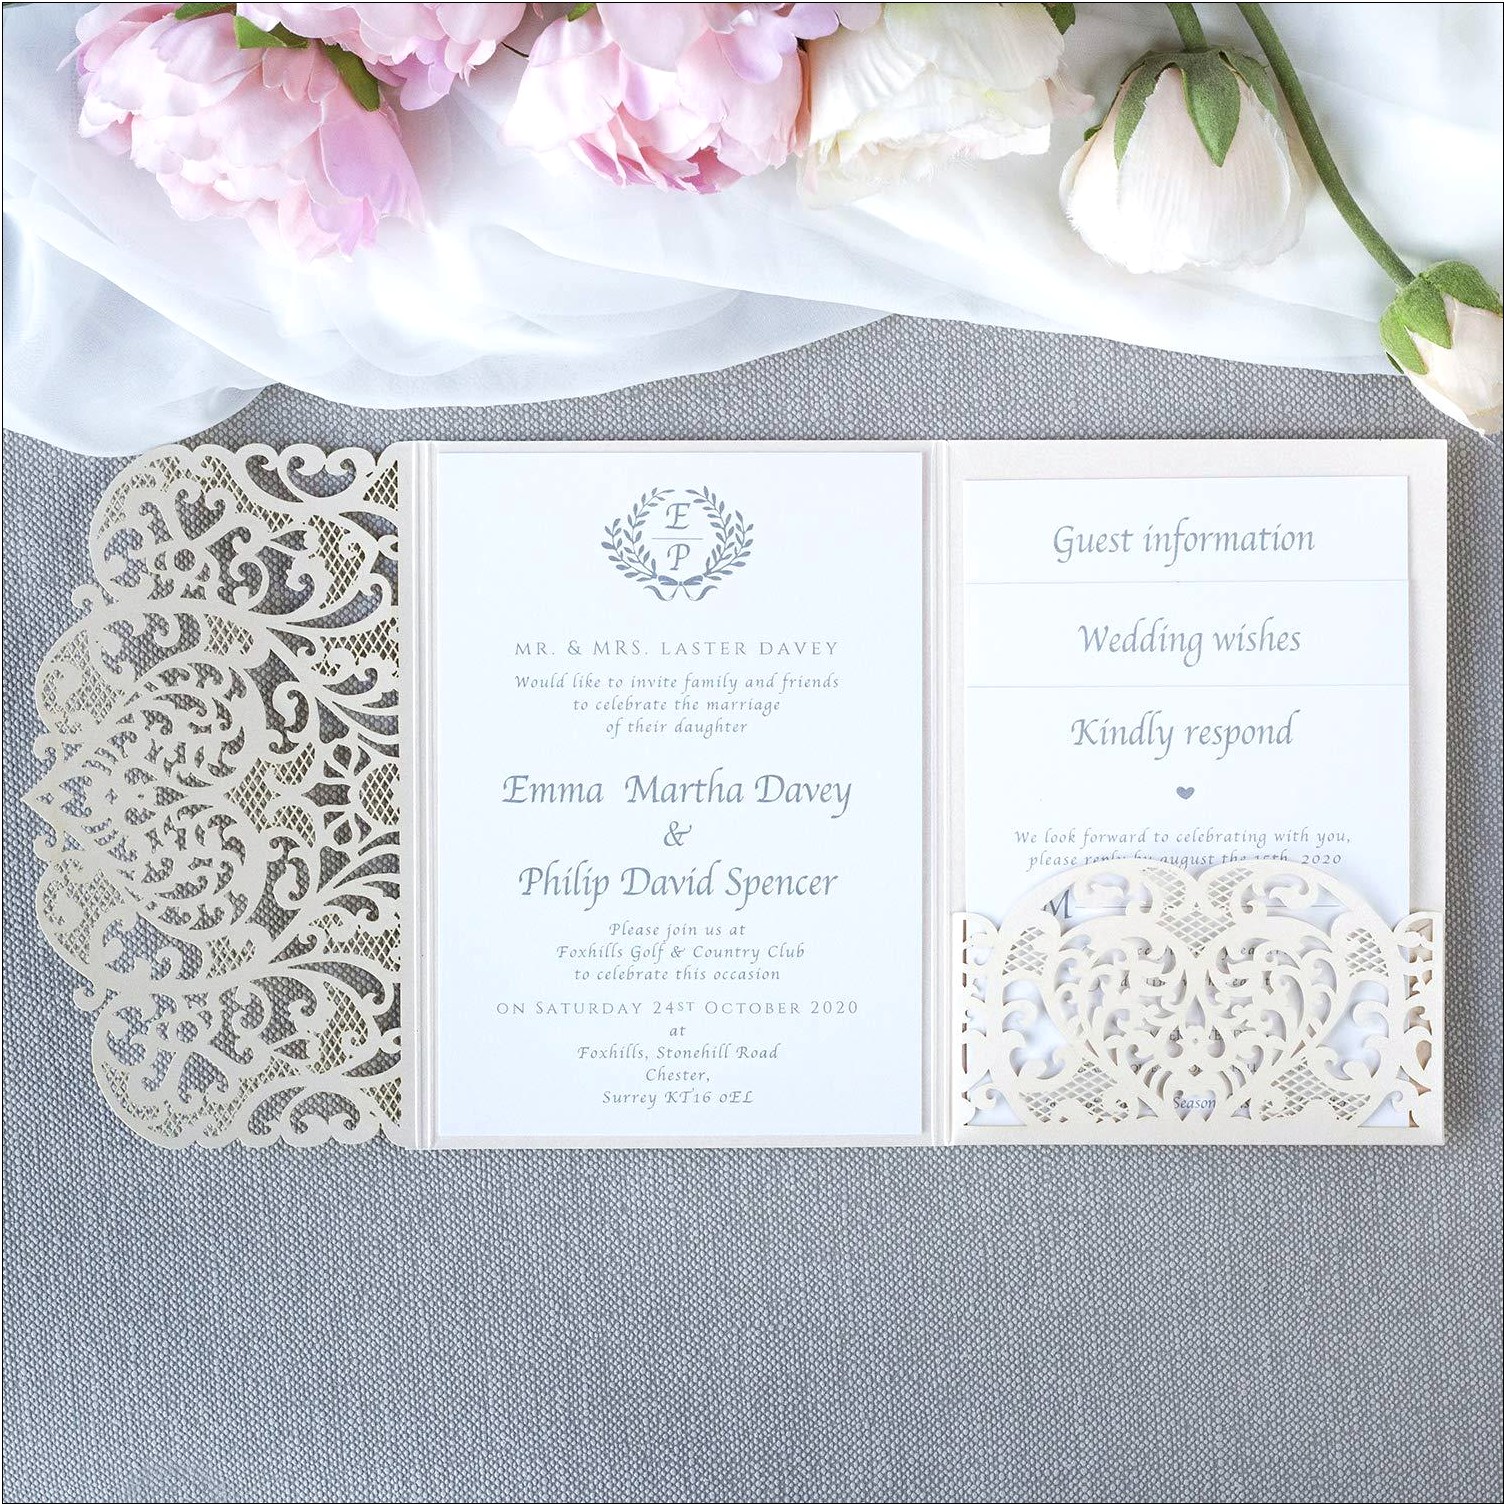 Formal Wedding Invitation For Someone Out The Country